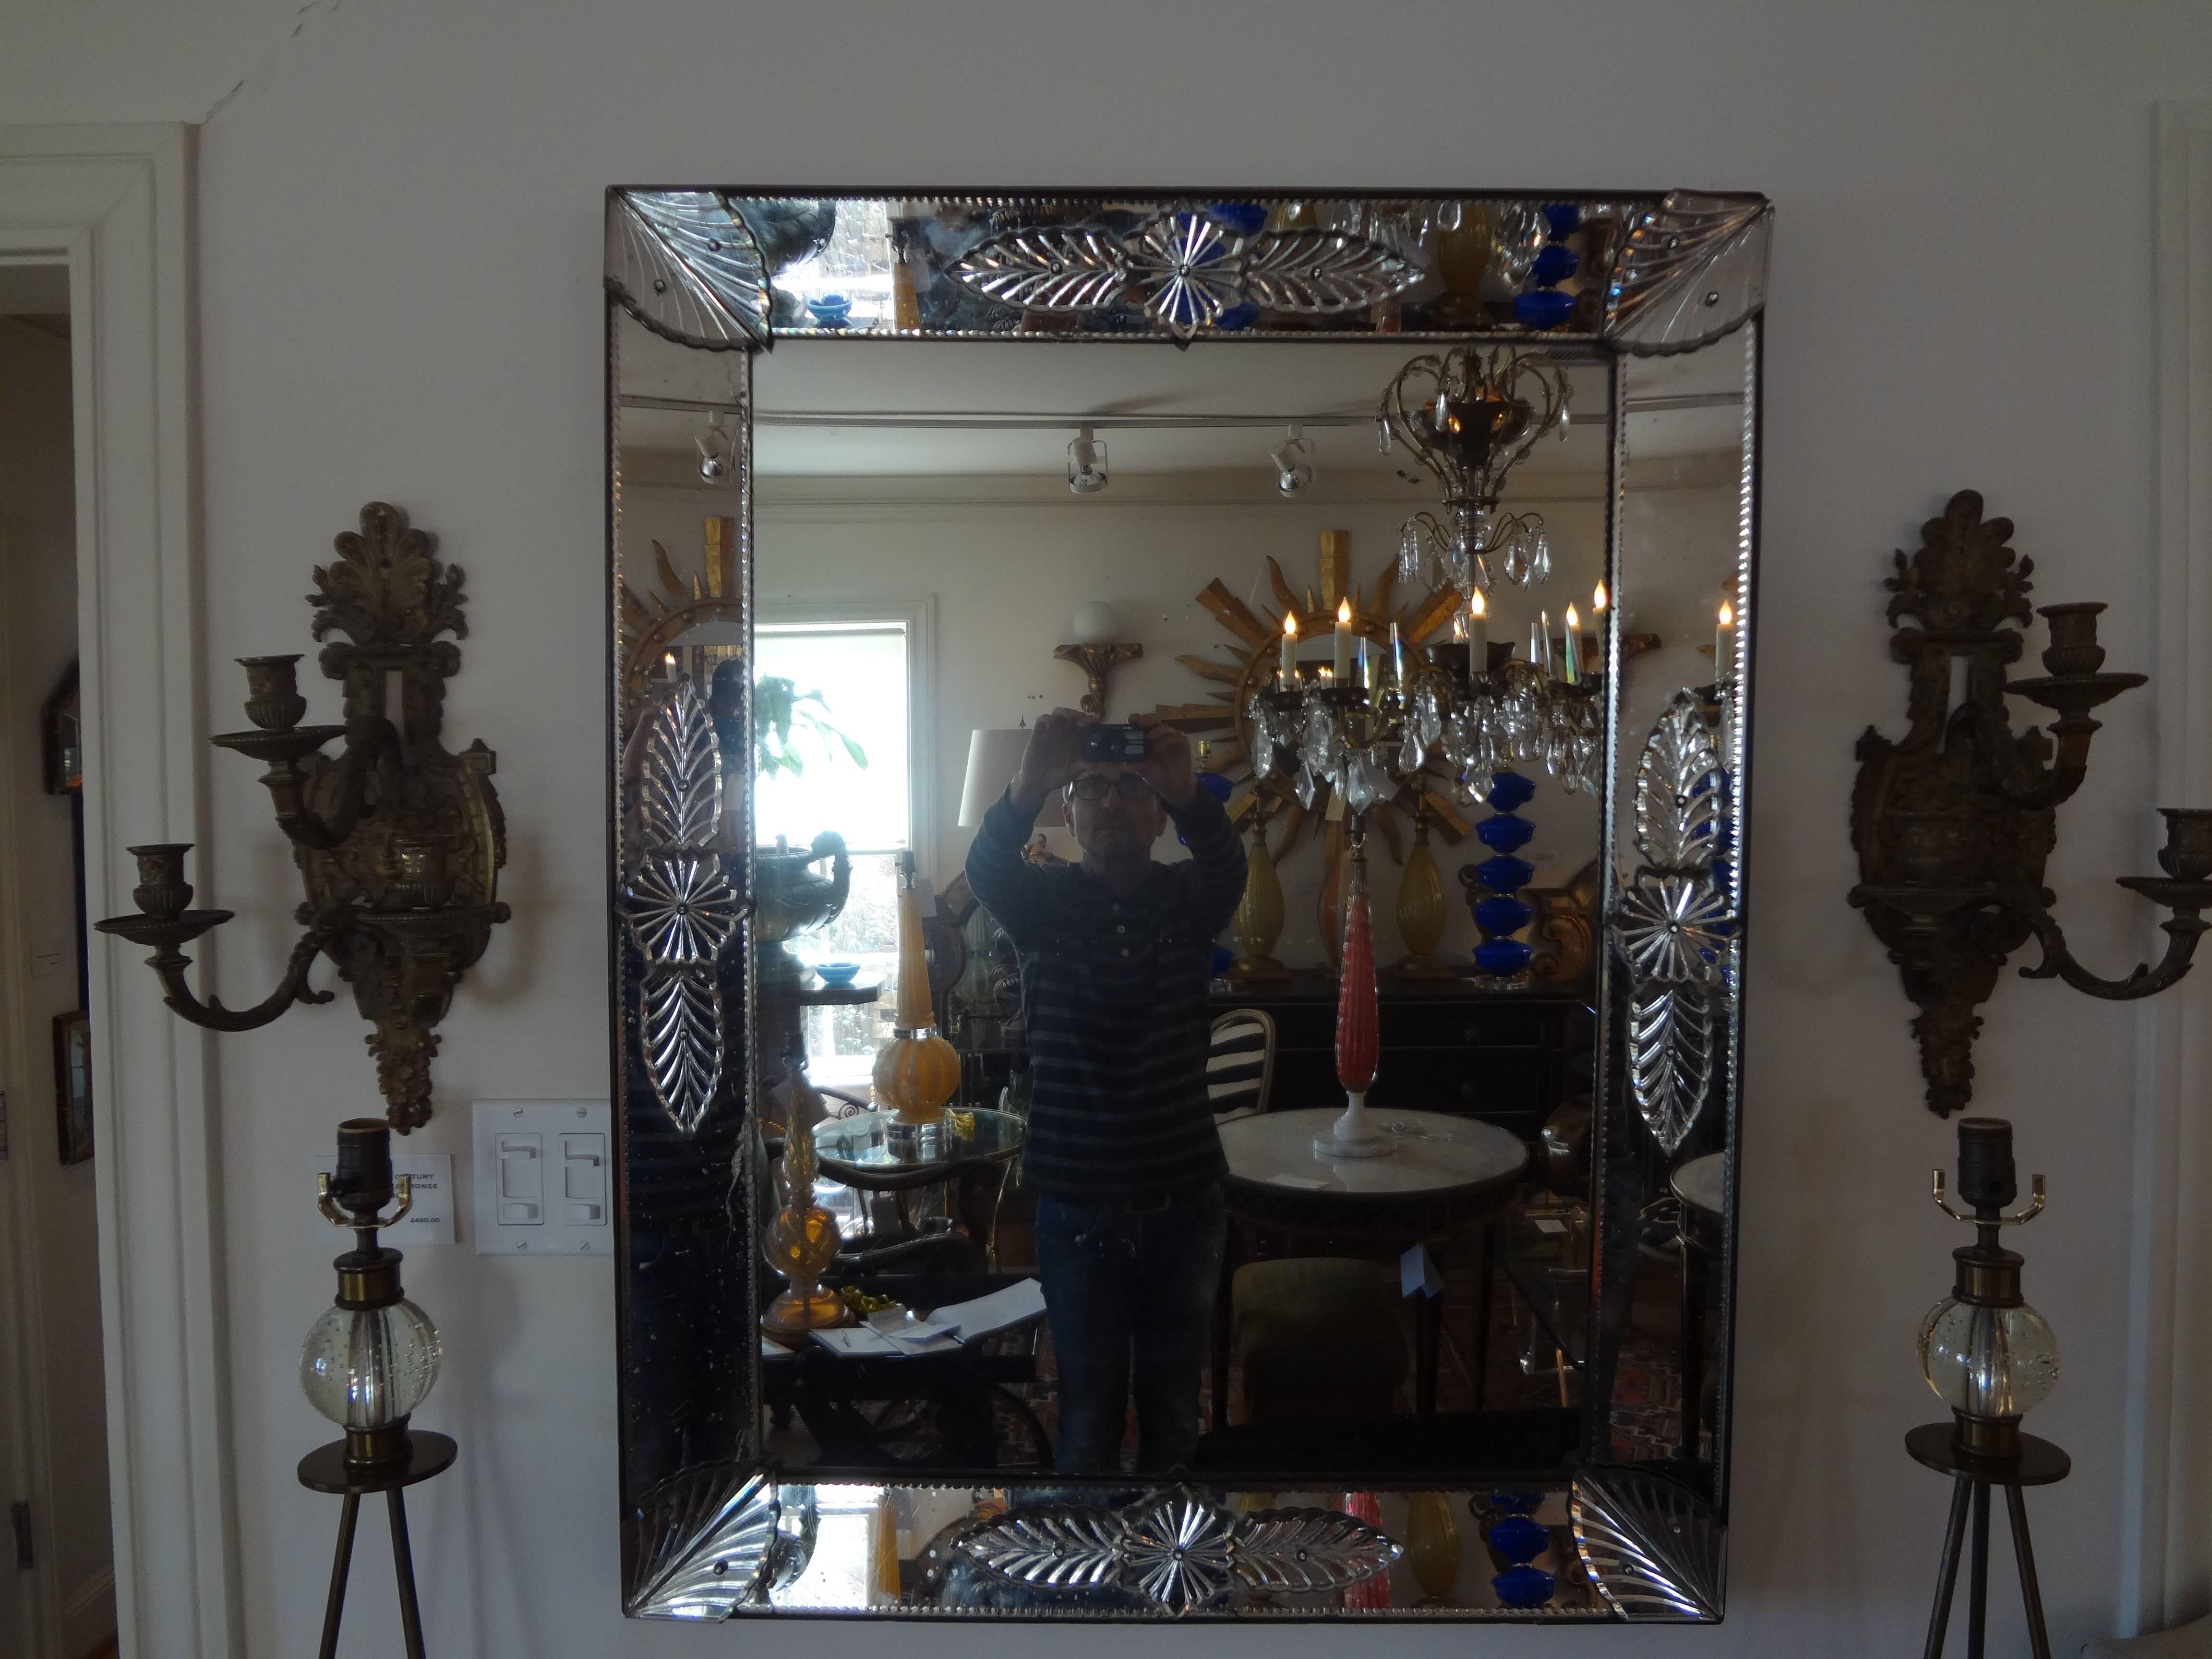 Louis XVI style Venetian mirror.
19th century Italian Venetian mirror that can be hung vertically or horizontally. This unusual Venetian mirror is mercury glass and has some minor expected foxing. The majority of this foxing on the fabulous Louis